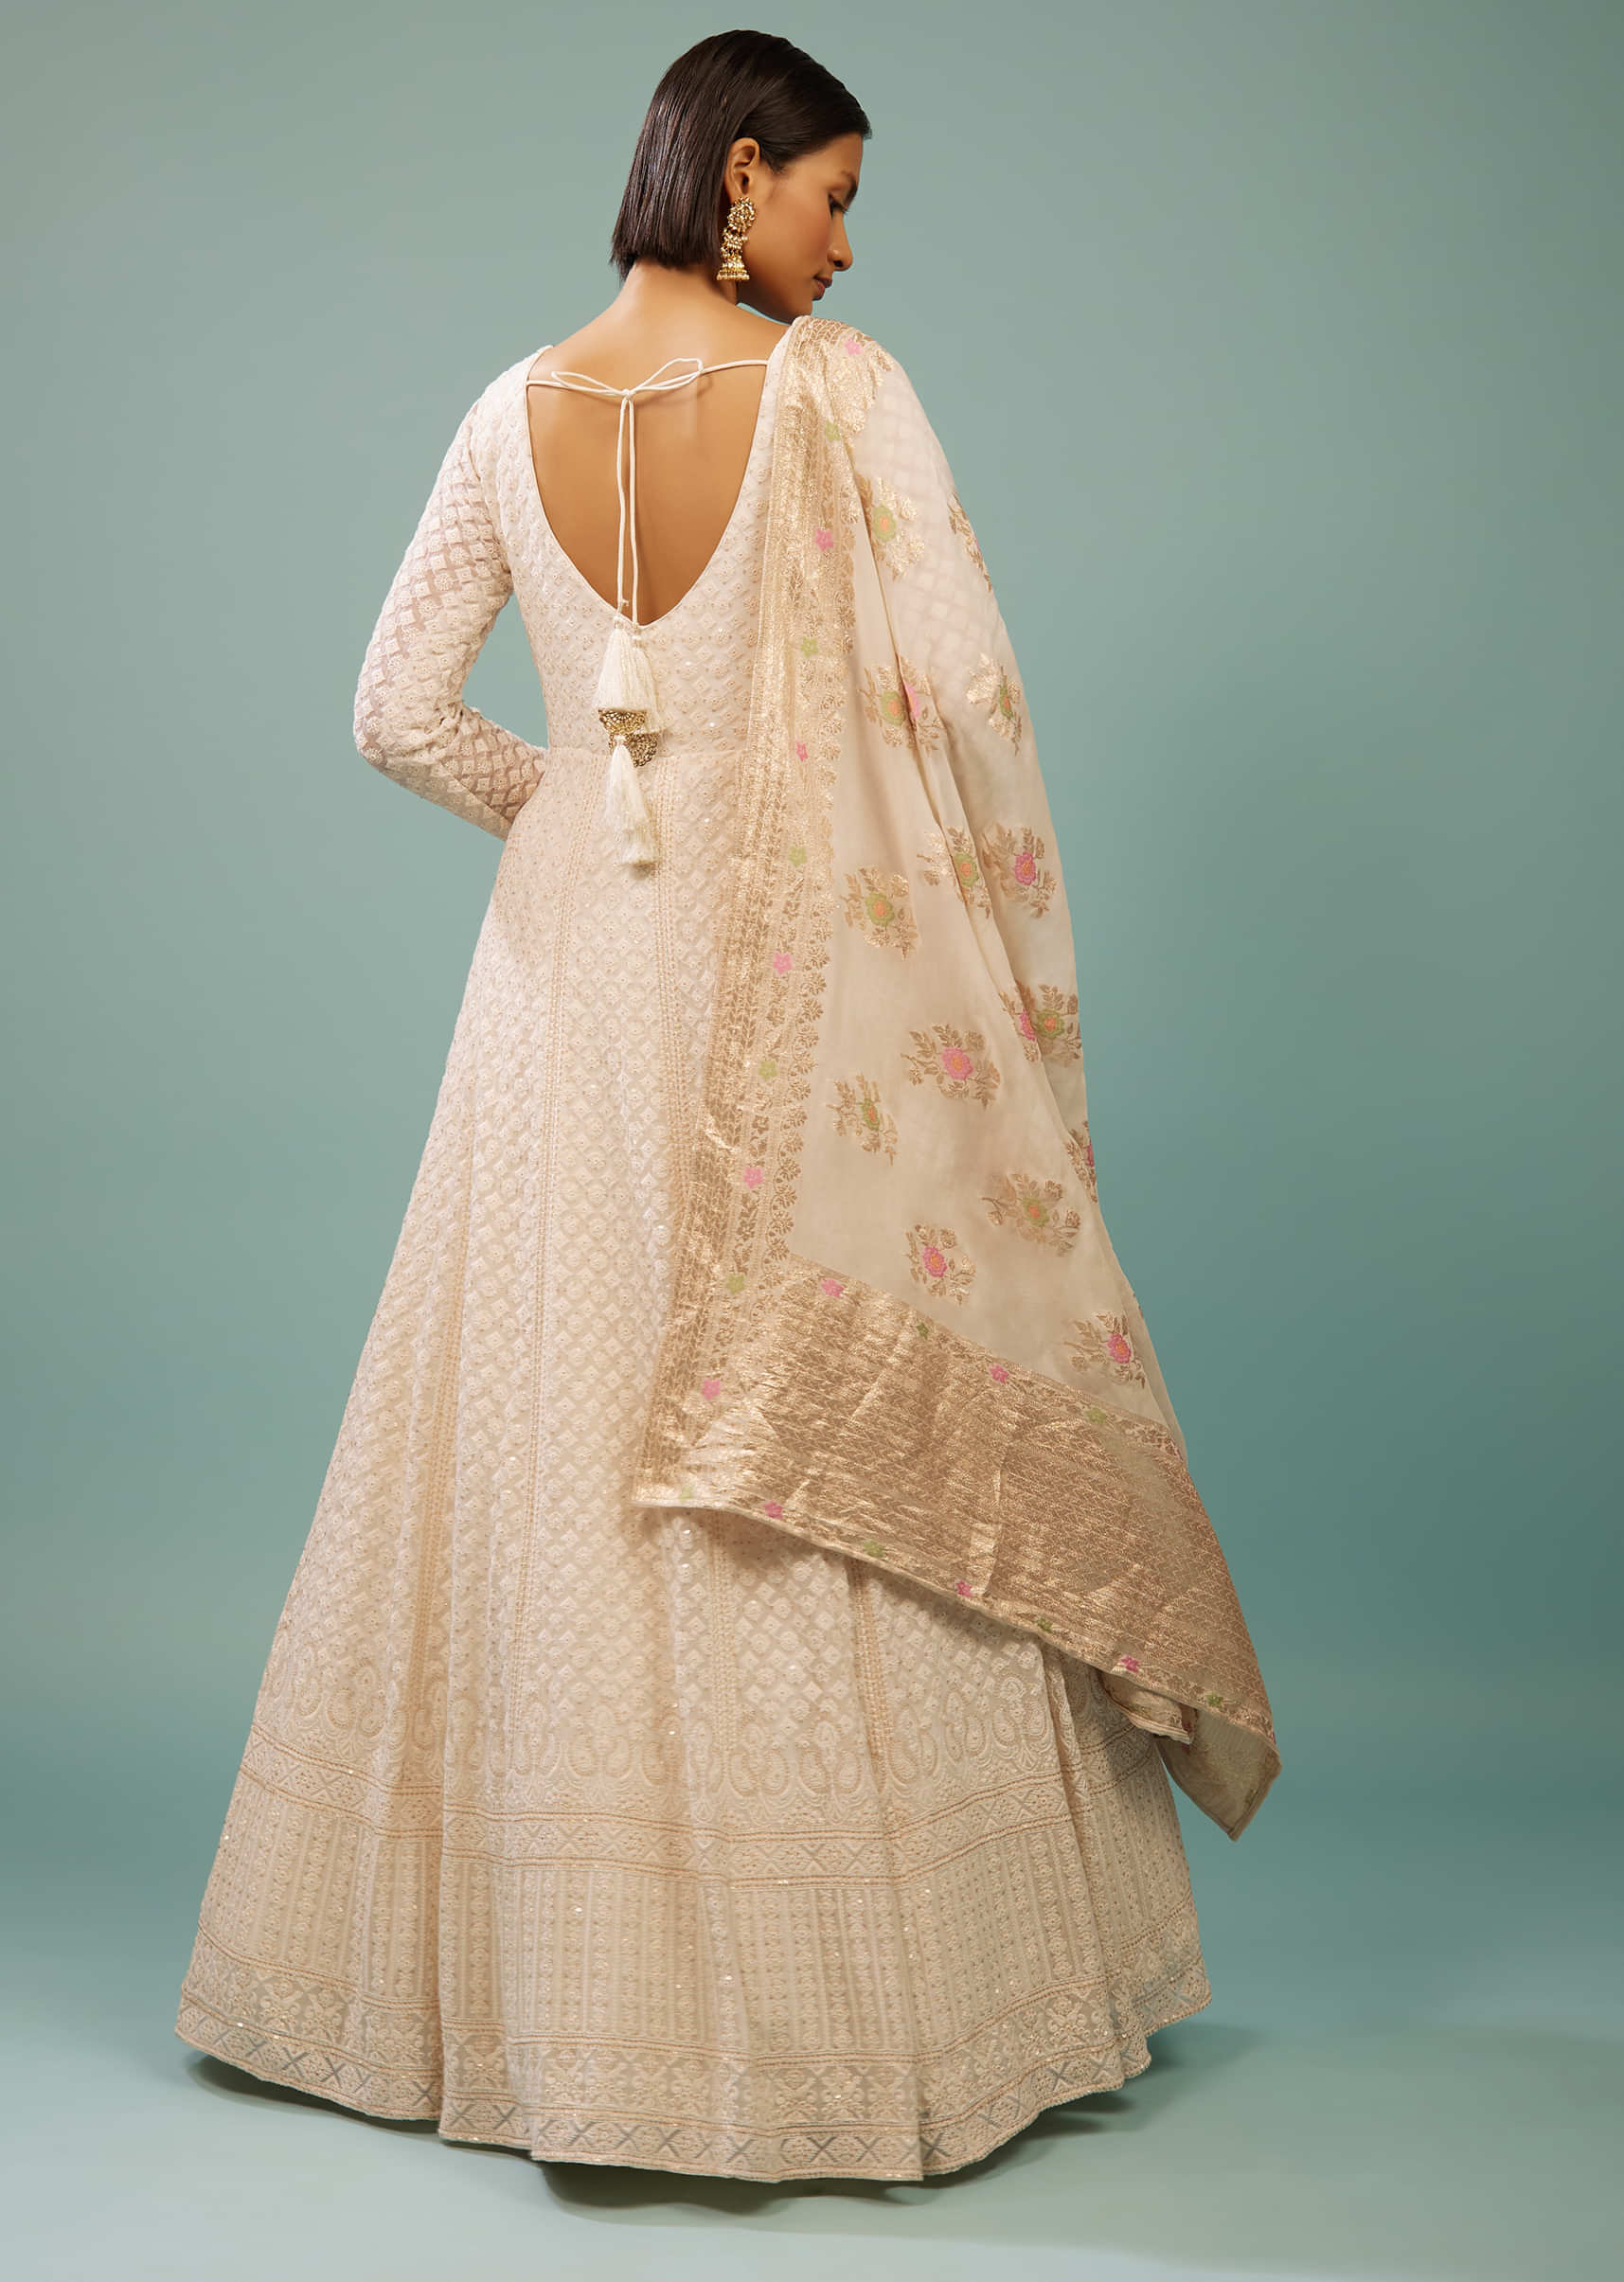 Daisy White Lucknowi Anarkali Suit In Georgette With Embroidery